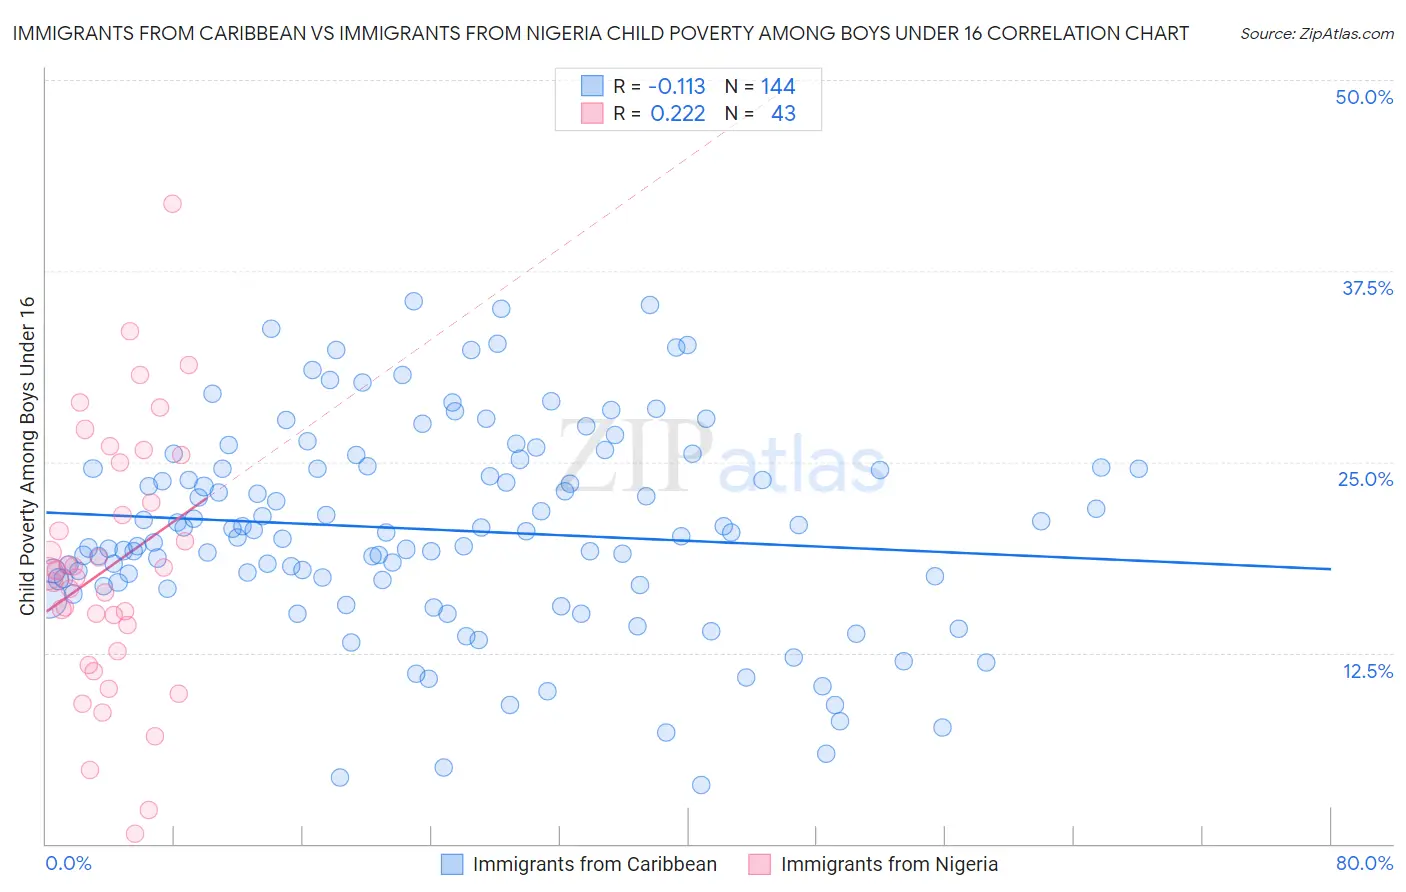 Immigrants from Caribbean vs Immigrants from Nigeria Child Poverty Among Boys Under 16